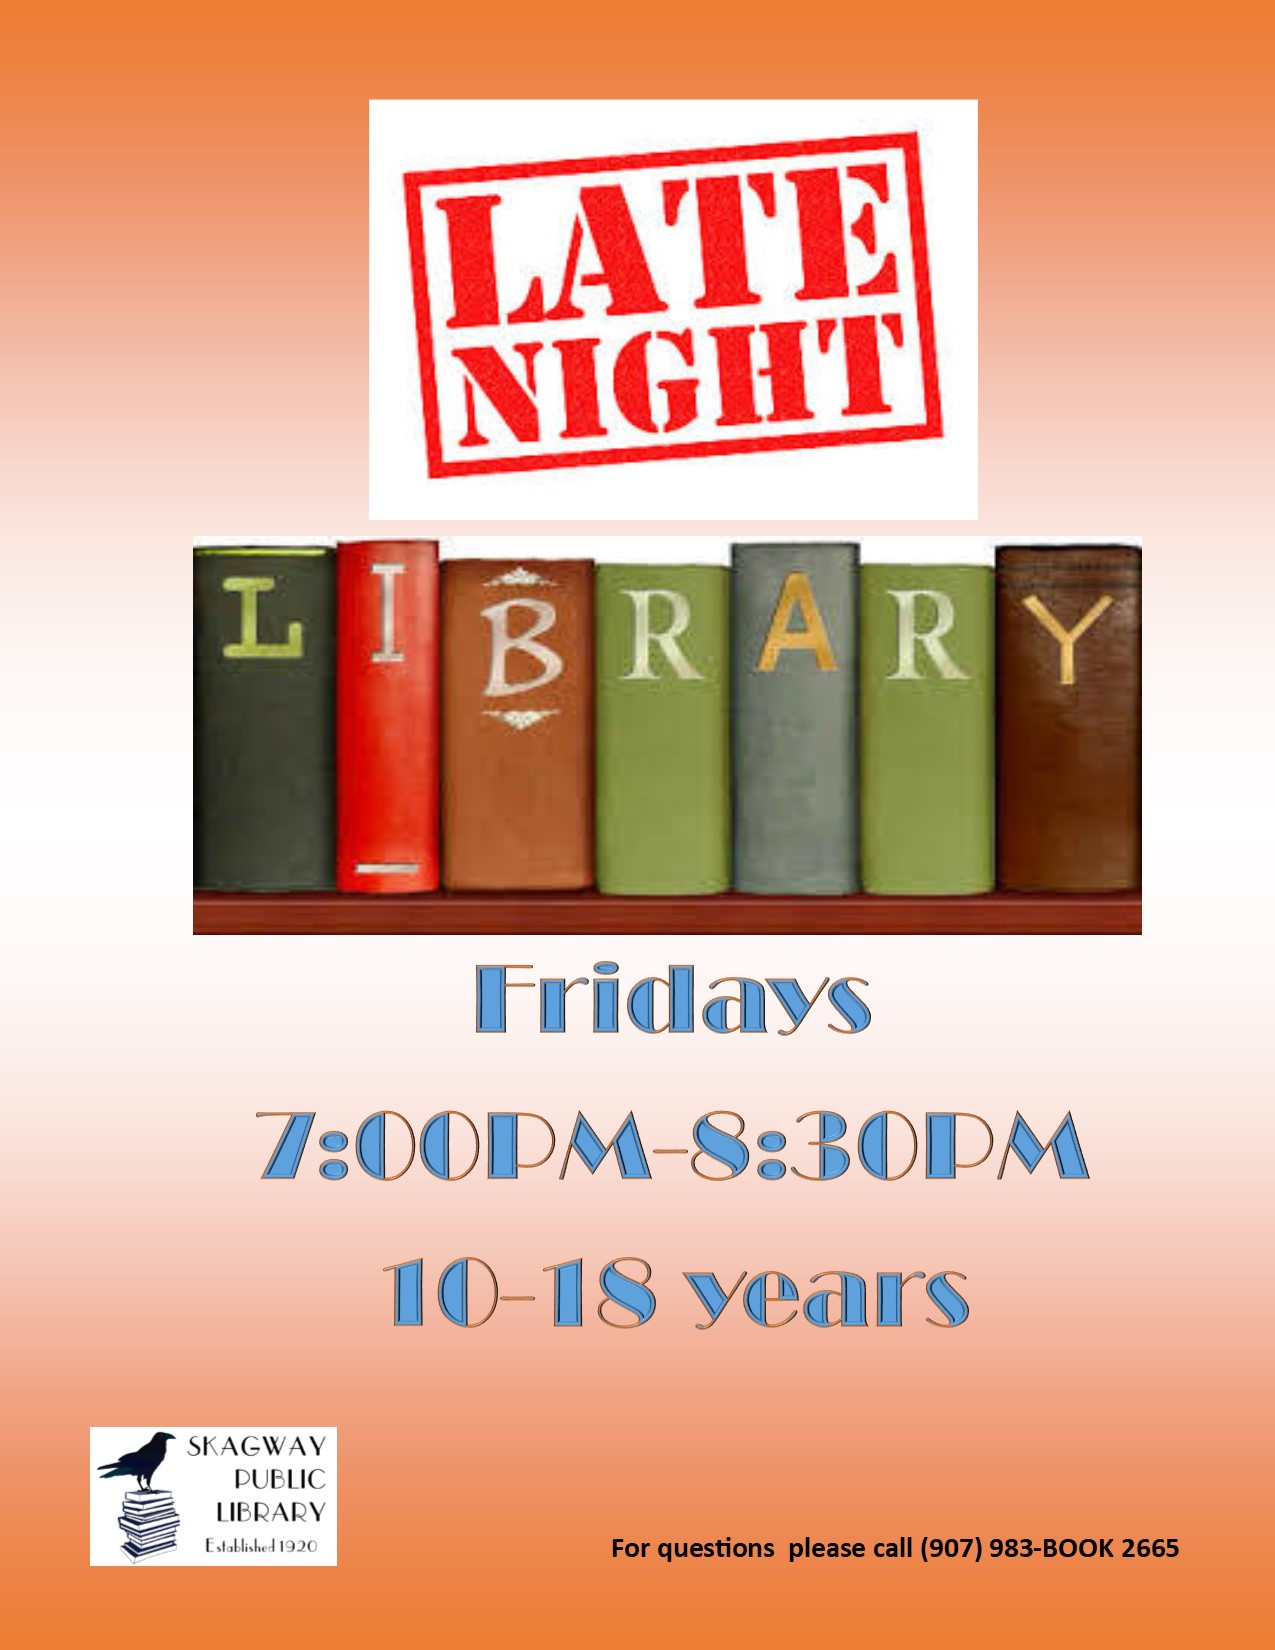 Late Night Library for 10-18 years old